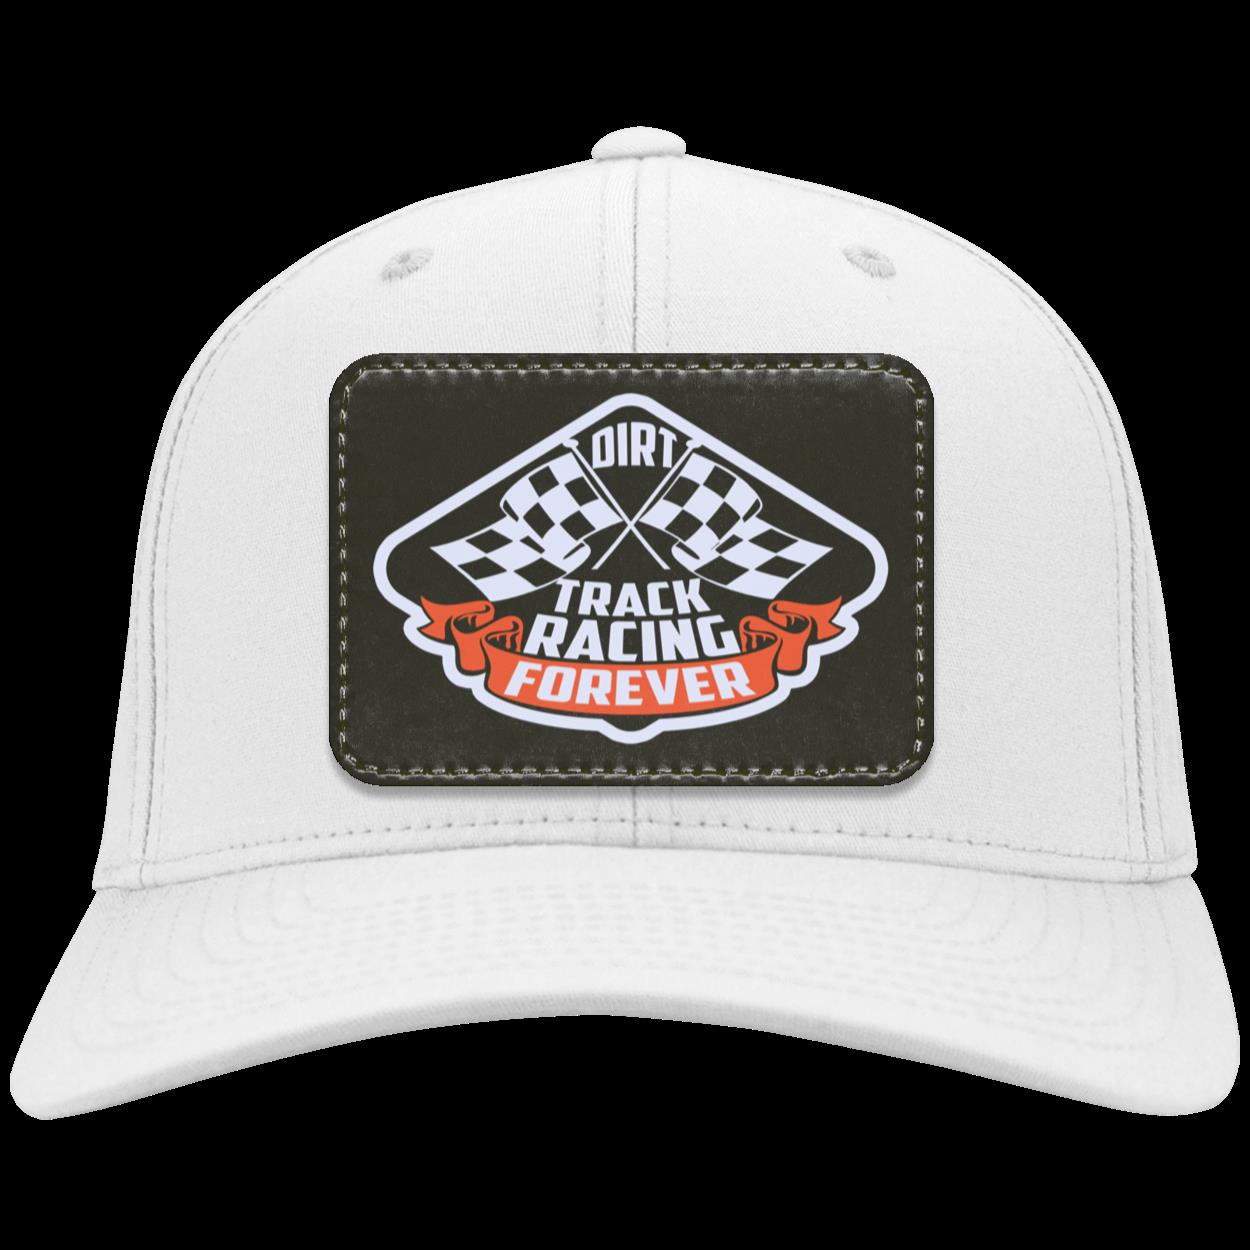 Dirt Track Racing Forever Patched Twill Cap V5